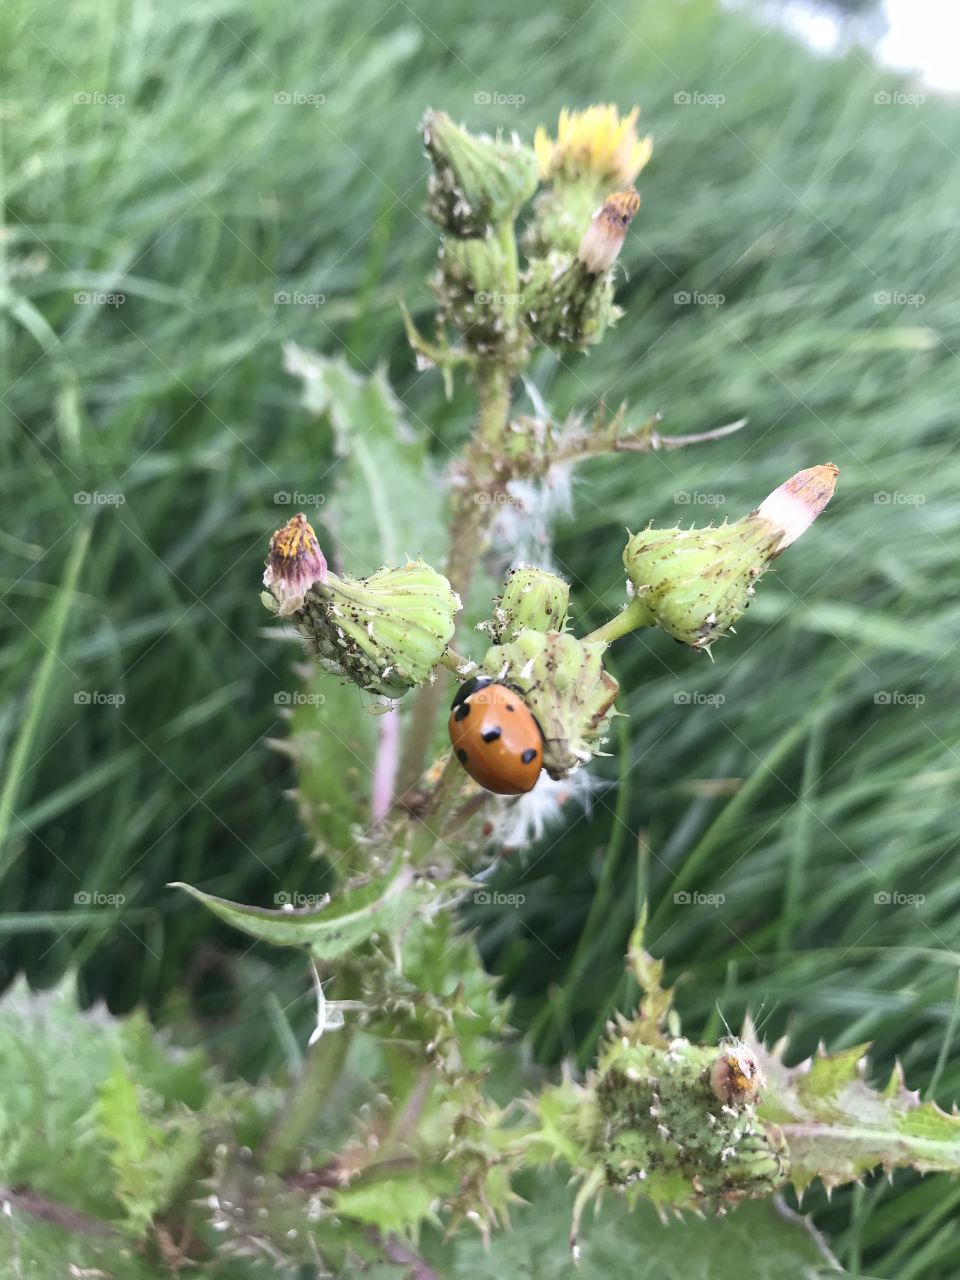 Lady bug crawling on a prickly plant possibly a weed. 